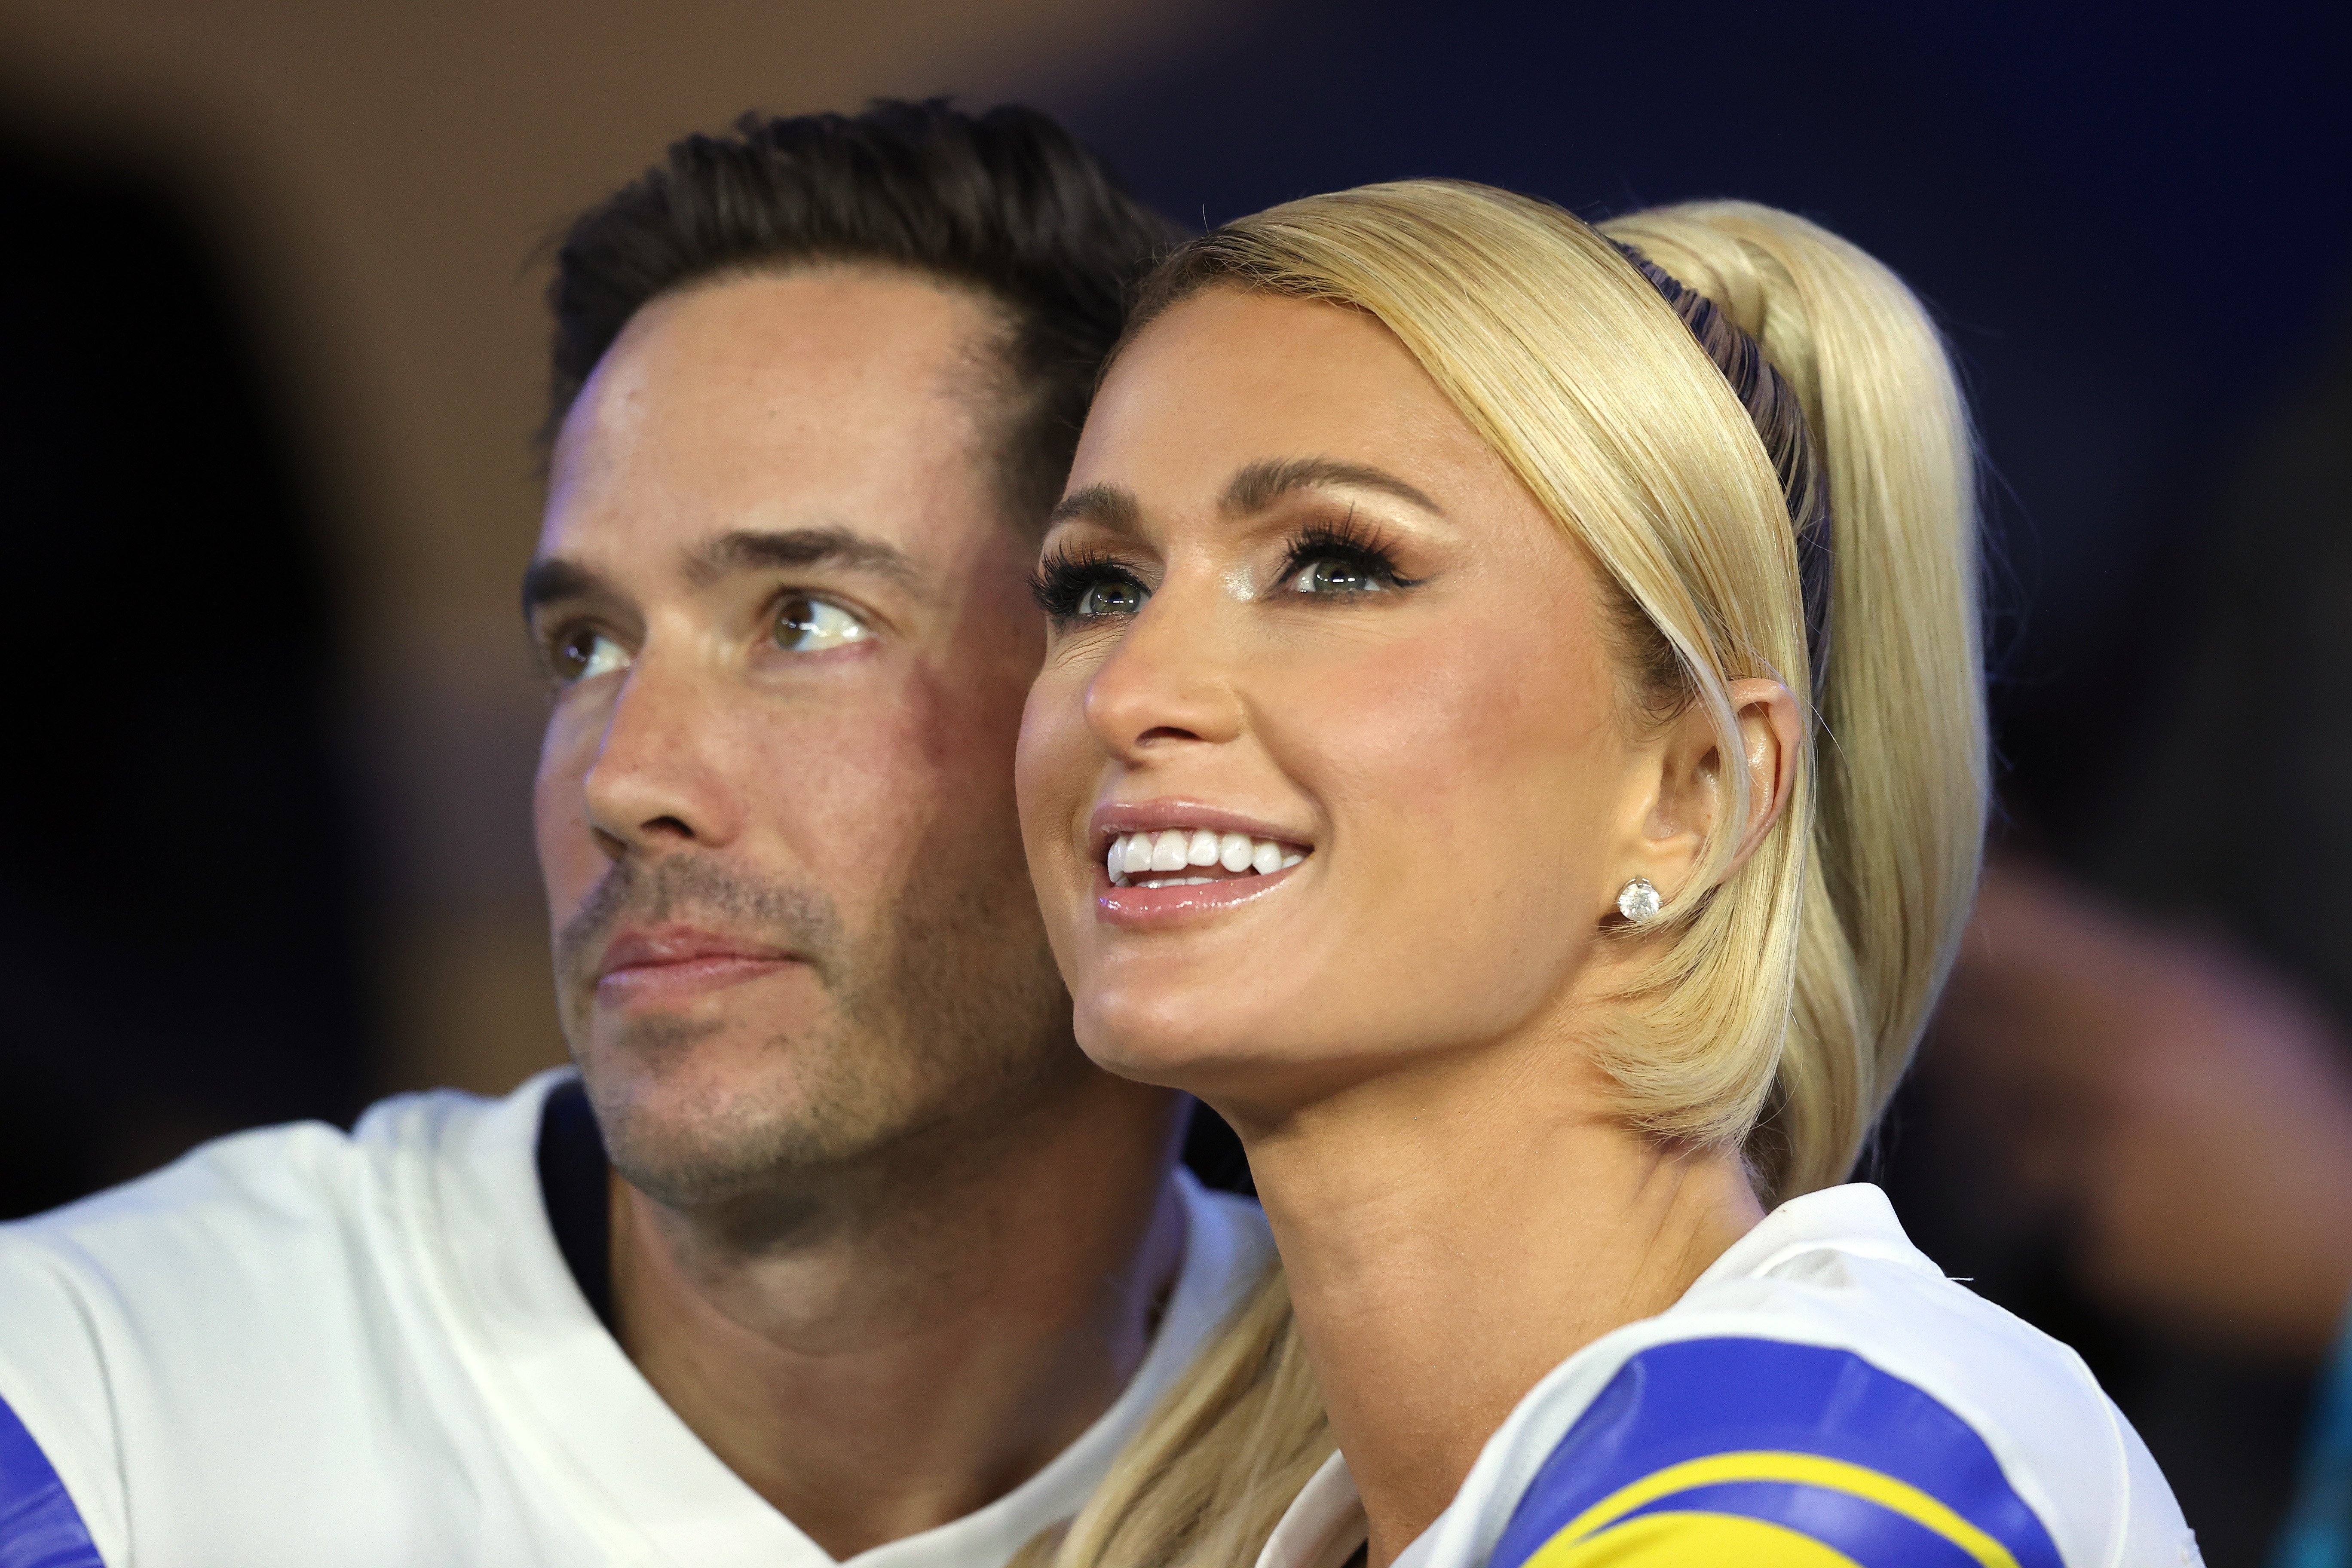 Carter Milliken Reum and Paris Hilton during the first quarter of the game between the Los Angeles Rams and the Tennessee Titans at SoFi Stadium on November 7, 2021, in Inglewood, California | Source: Getty Images